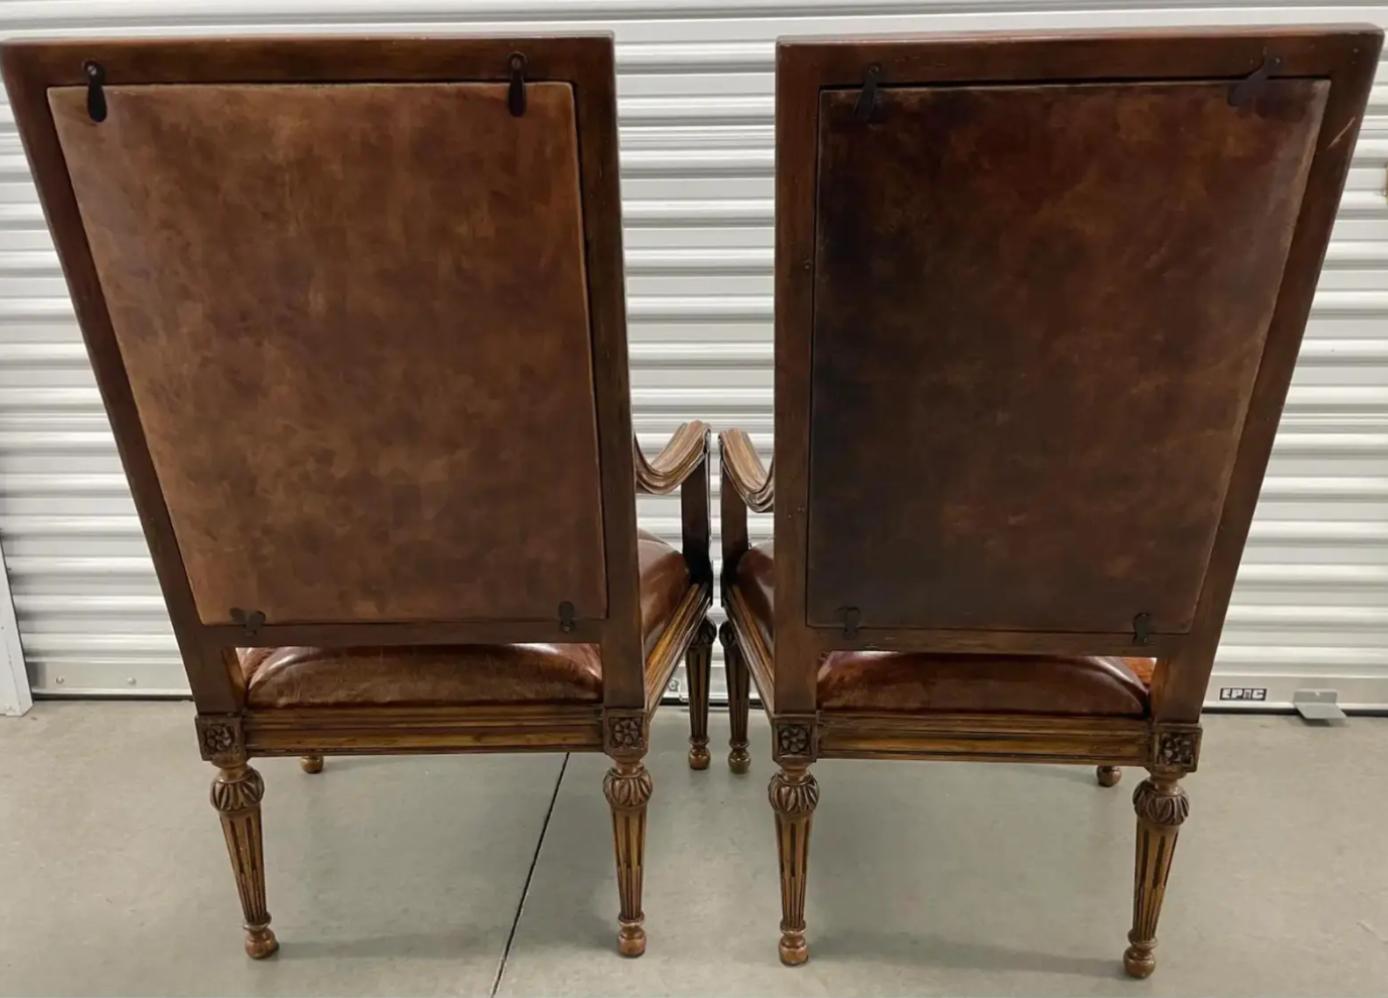 American Pair of 18th C Style Hendrix Allardyce Tufted Leather Giltwood Arm Chairs  For Sale